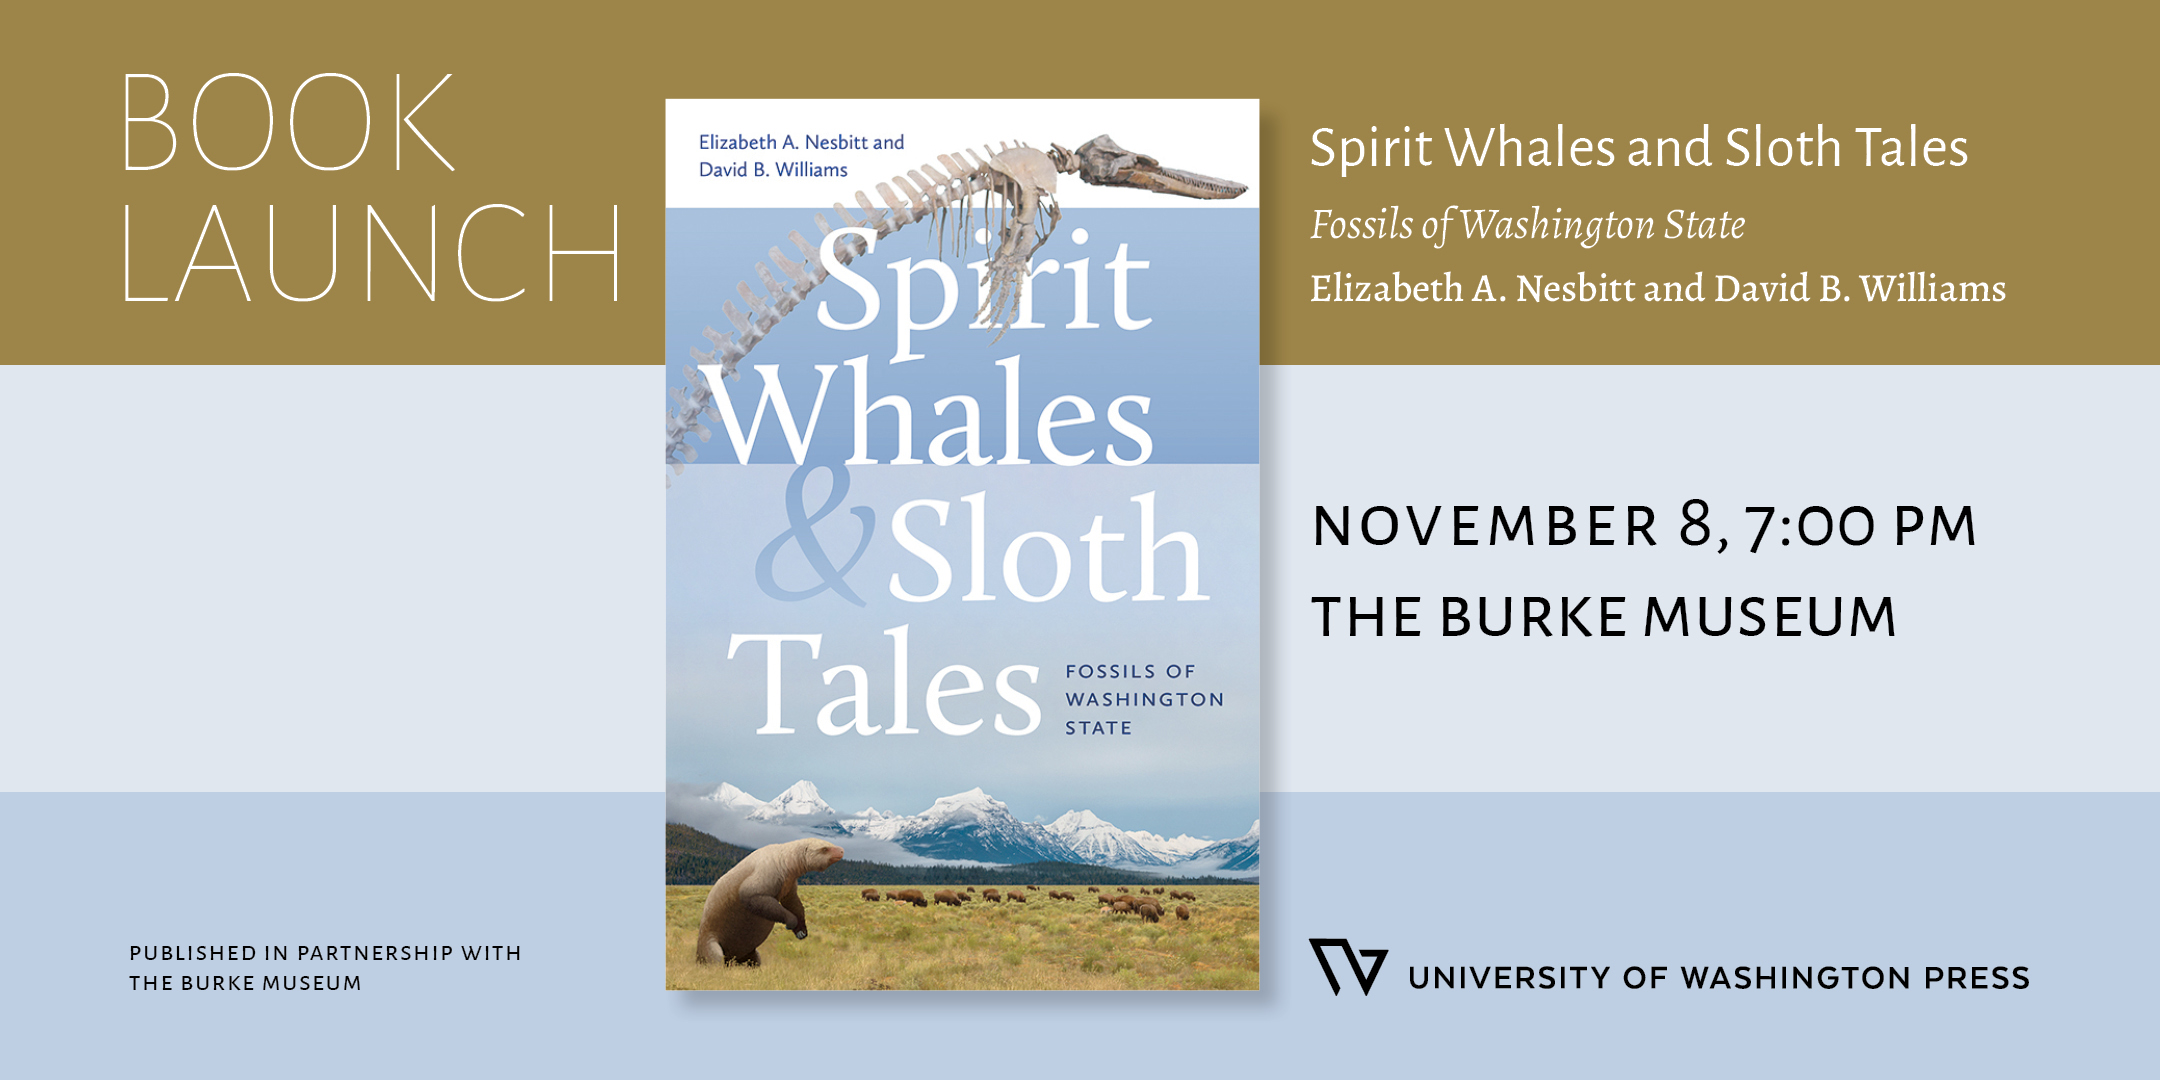 spirit whales & sloth tales: fossils of washington state